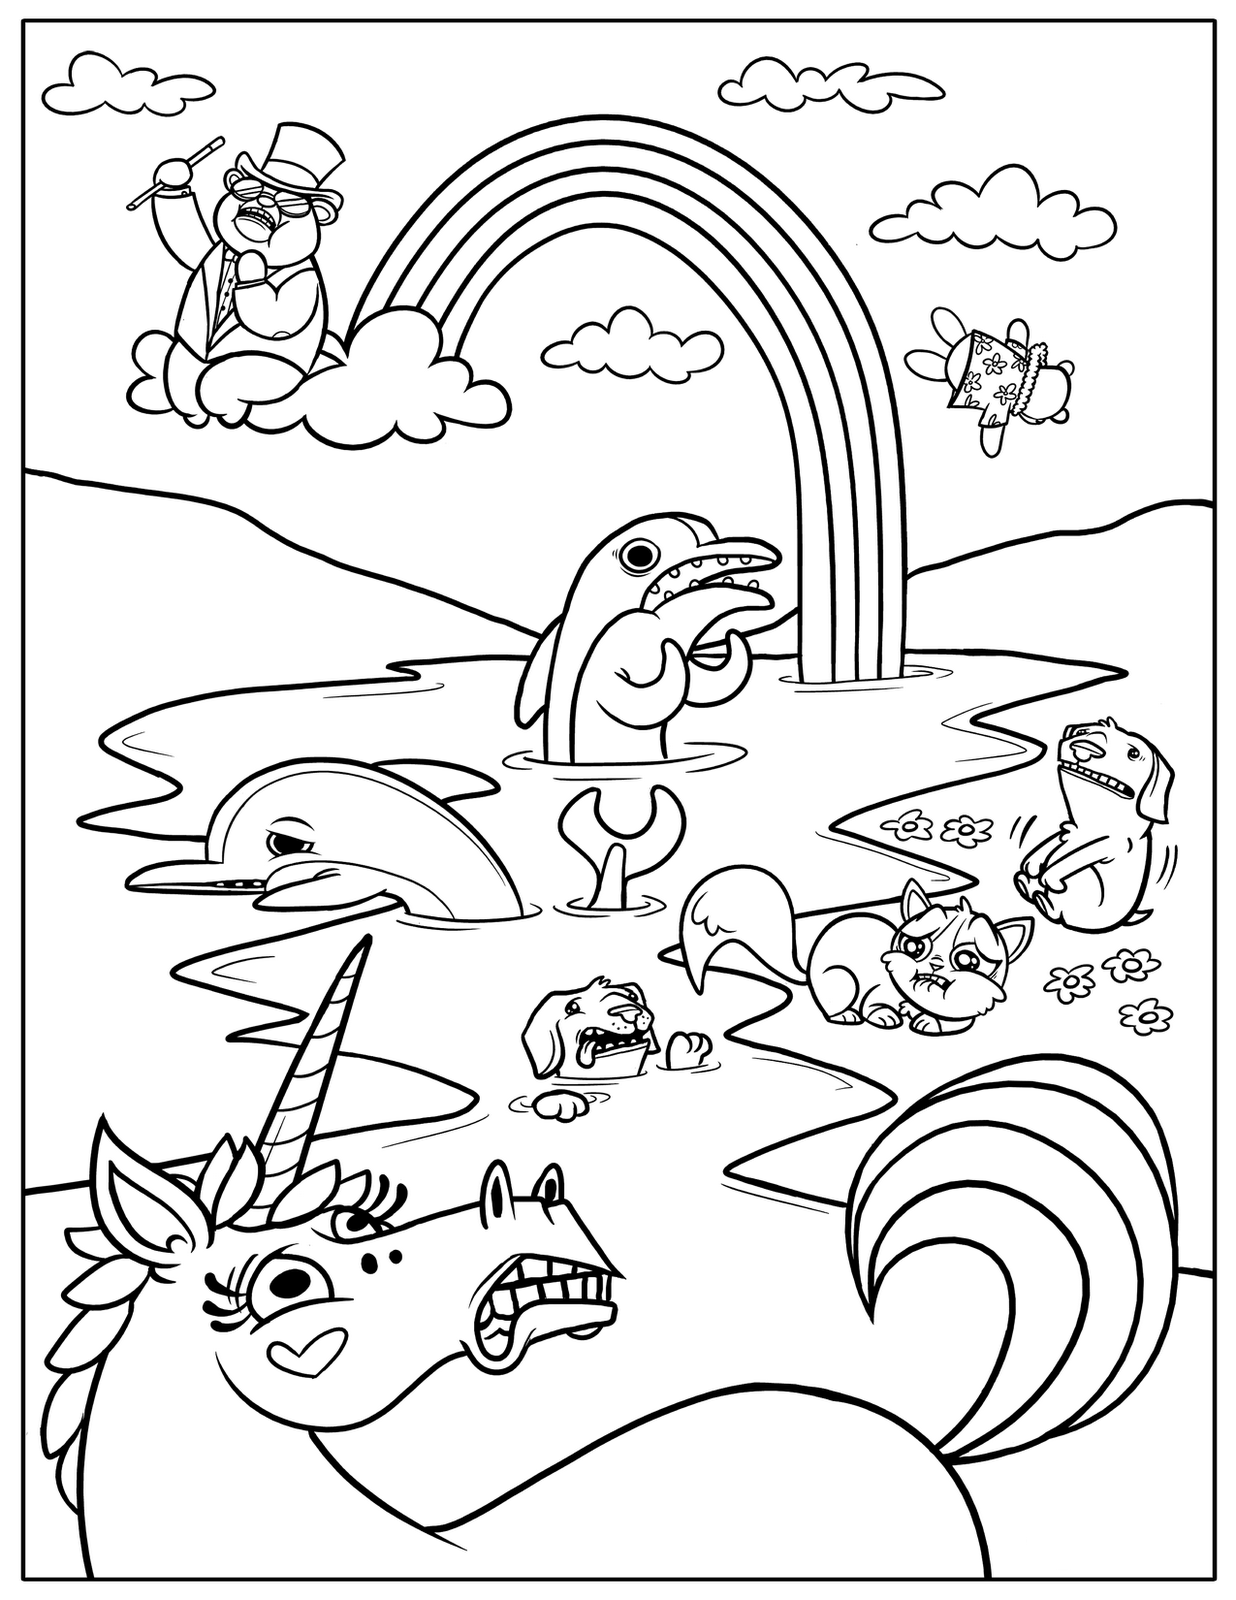  Rainbow  Coloring  Page  Ally s Party